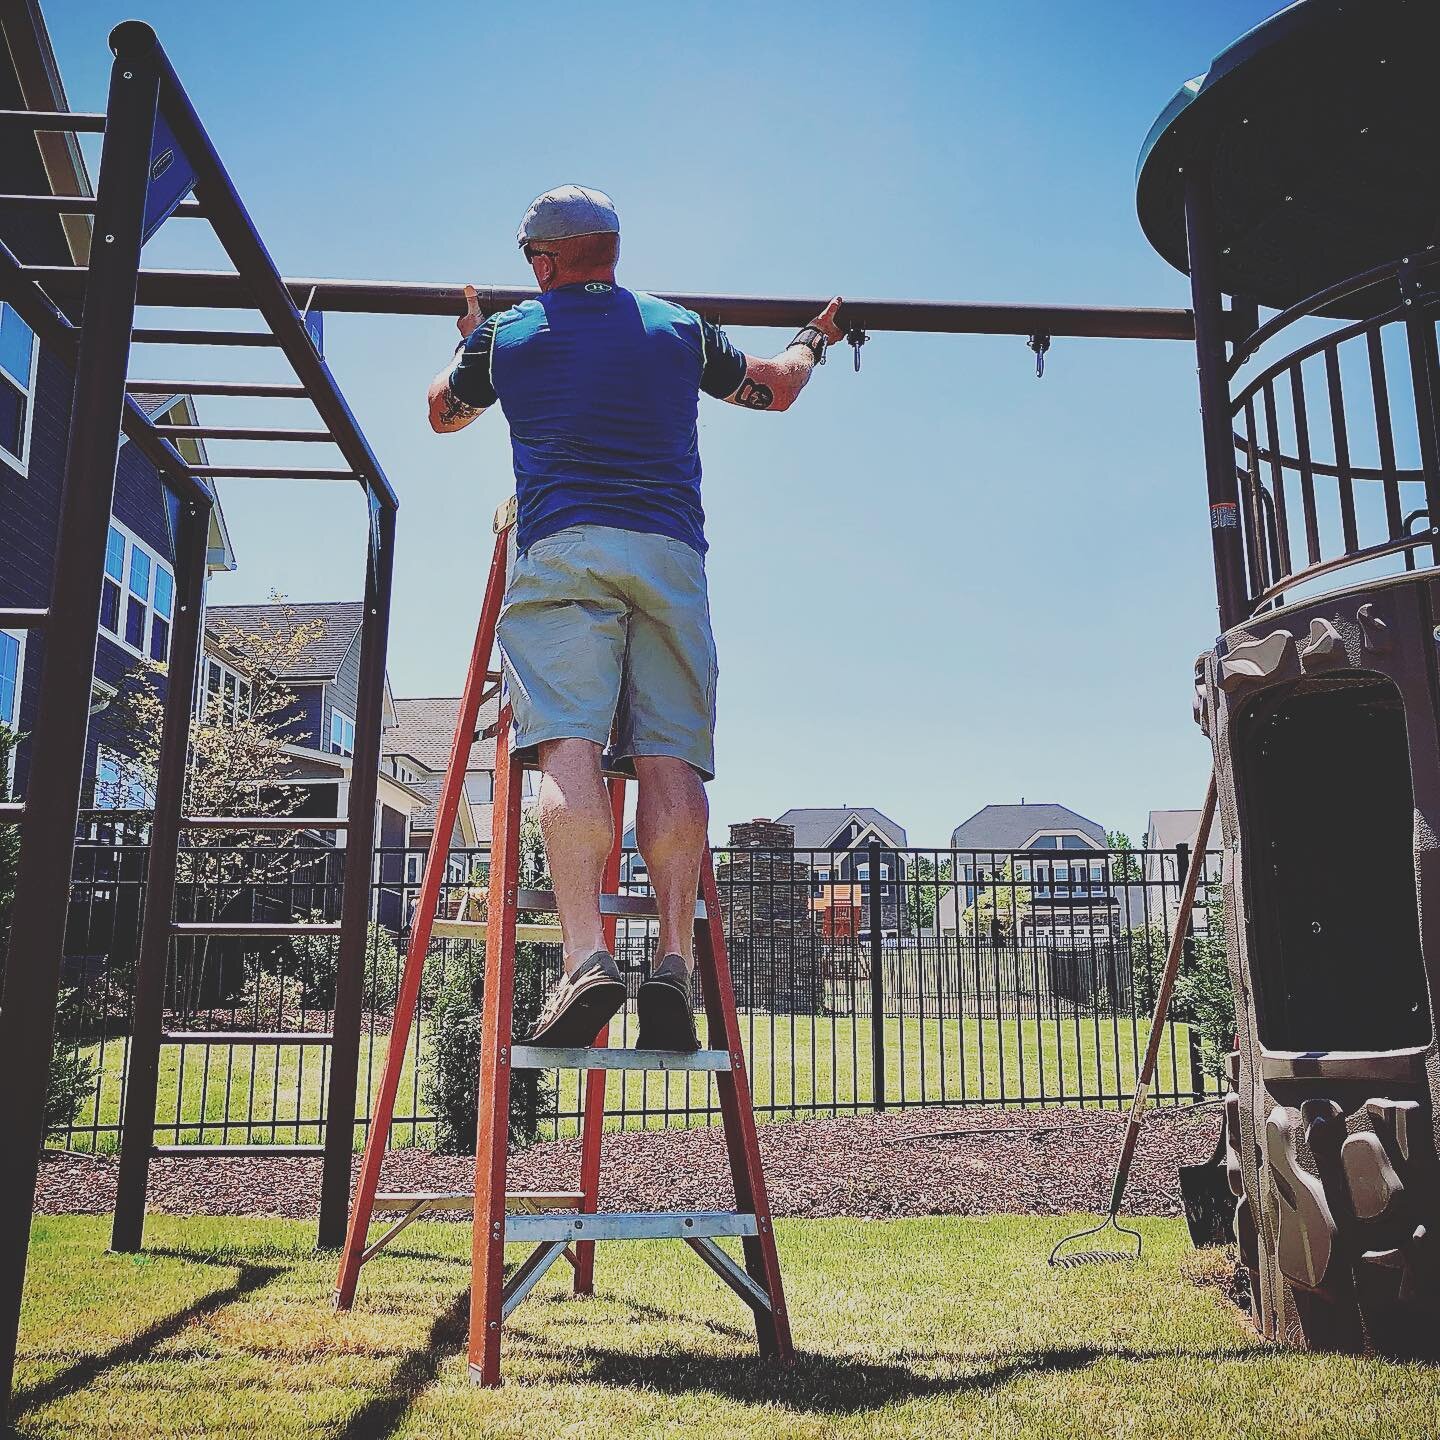 &ldquo;And then this thingy goes here, or something like that.....oh eff if I know....where&rsquo;s my mallet!? Who took the mallet!?&rdquo; 

#itaintgoingnowhere 

#strongarmofthelawn #playsetinstallation #swingsetinstallation #playgrounds #playset 